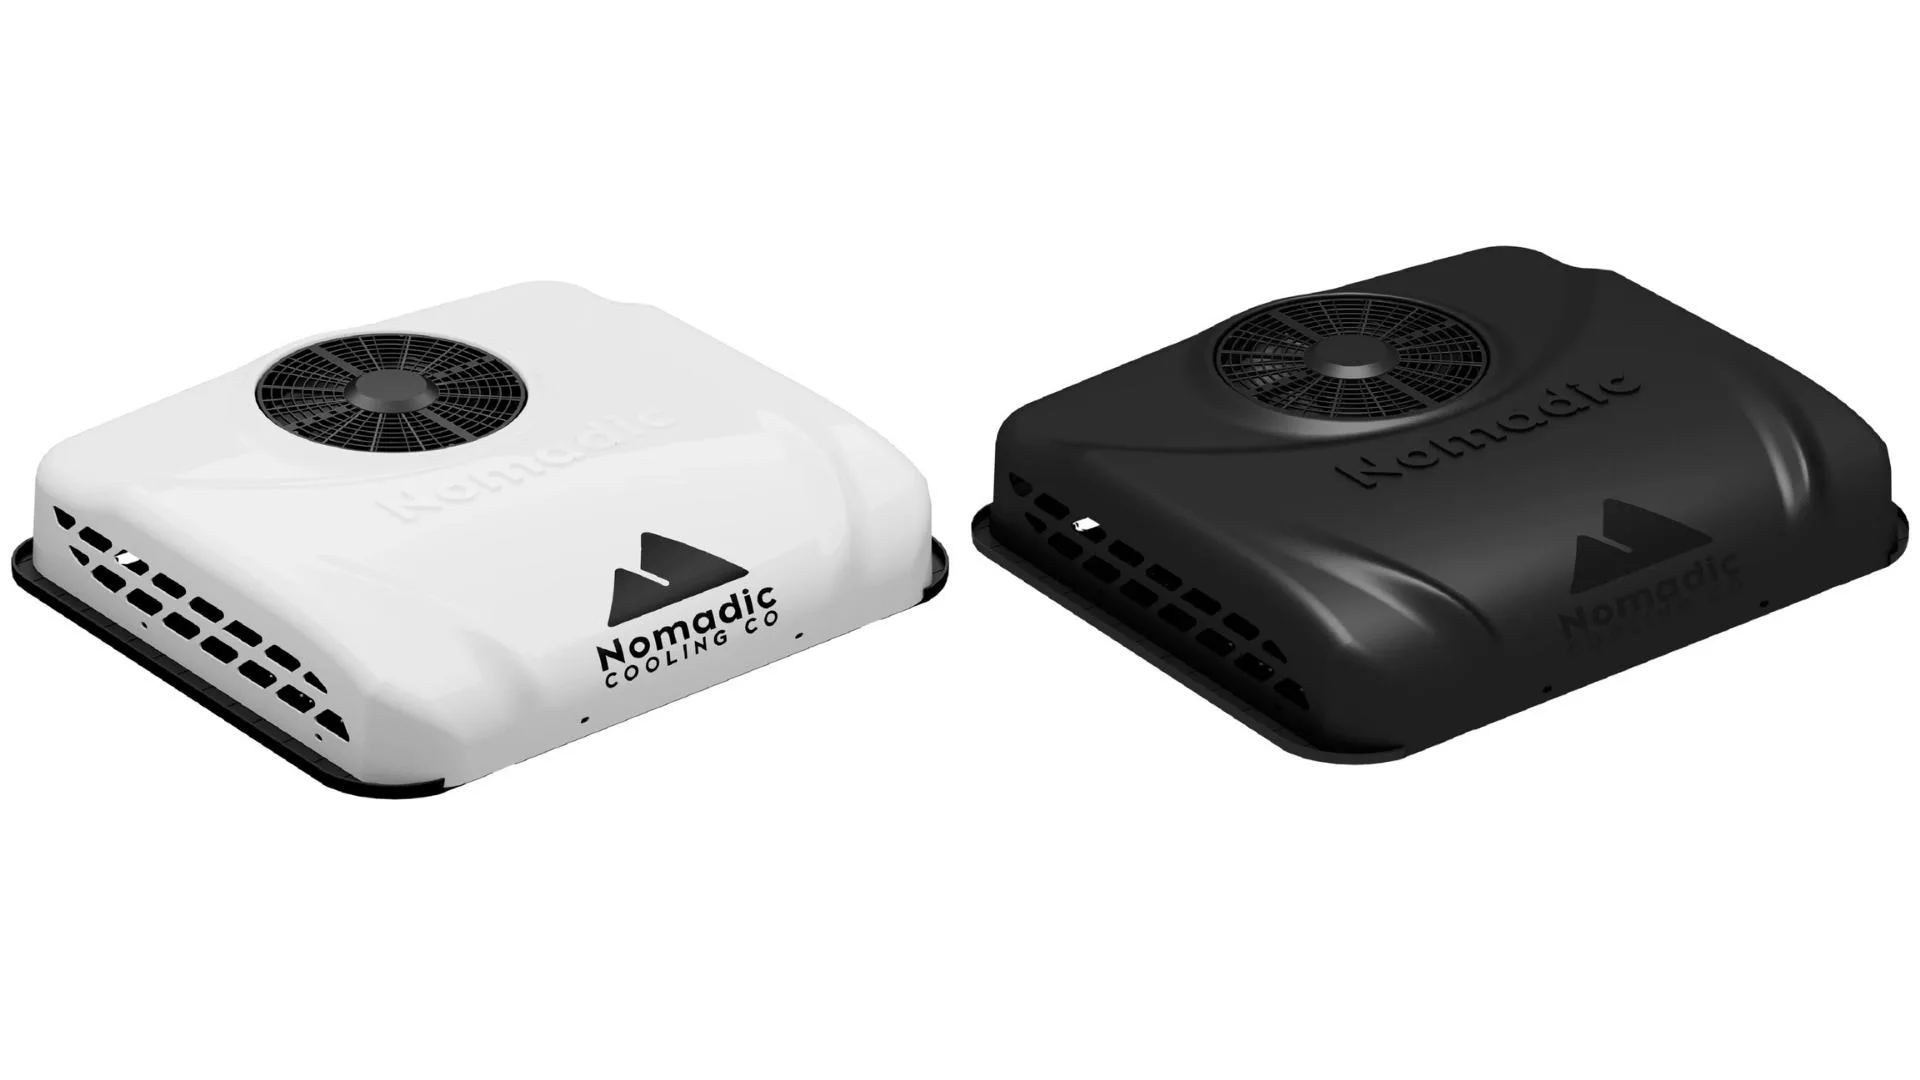 Photos of the white and black versions of the Nomadic Cooling 2000 12V RV air conditioners